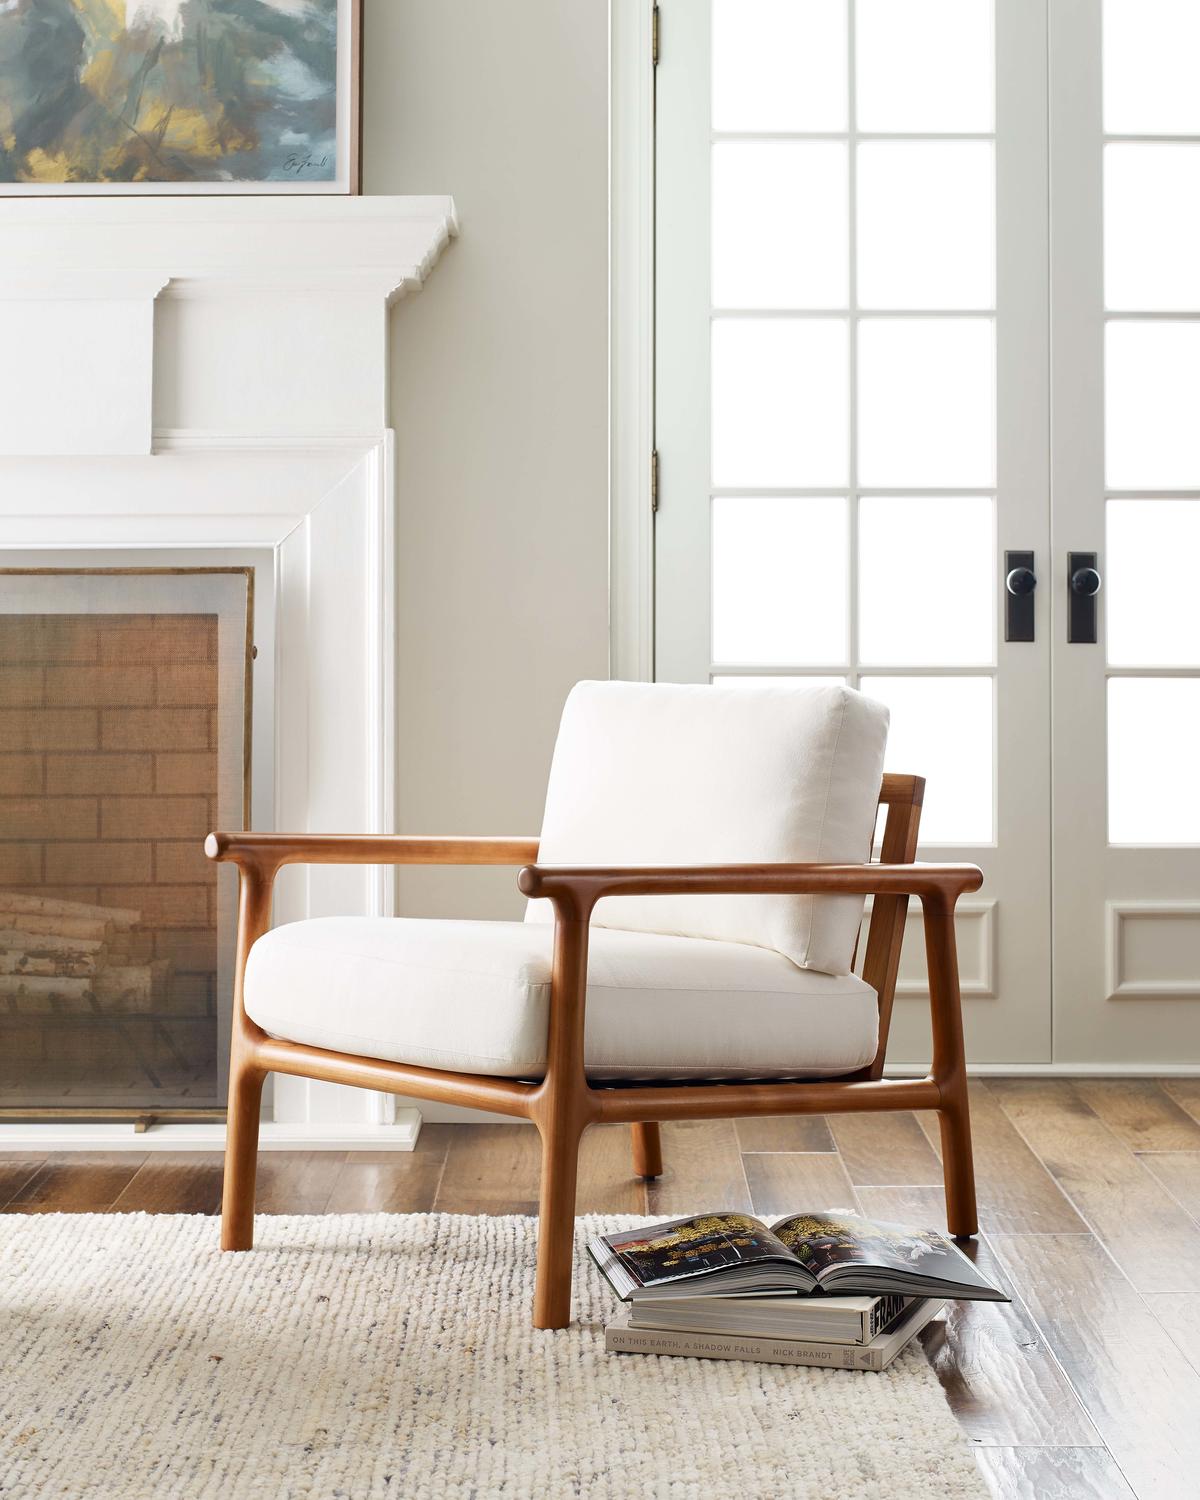 The Laguna chair from Mitchell Gold + Bob Williams